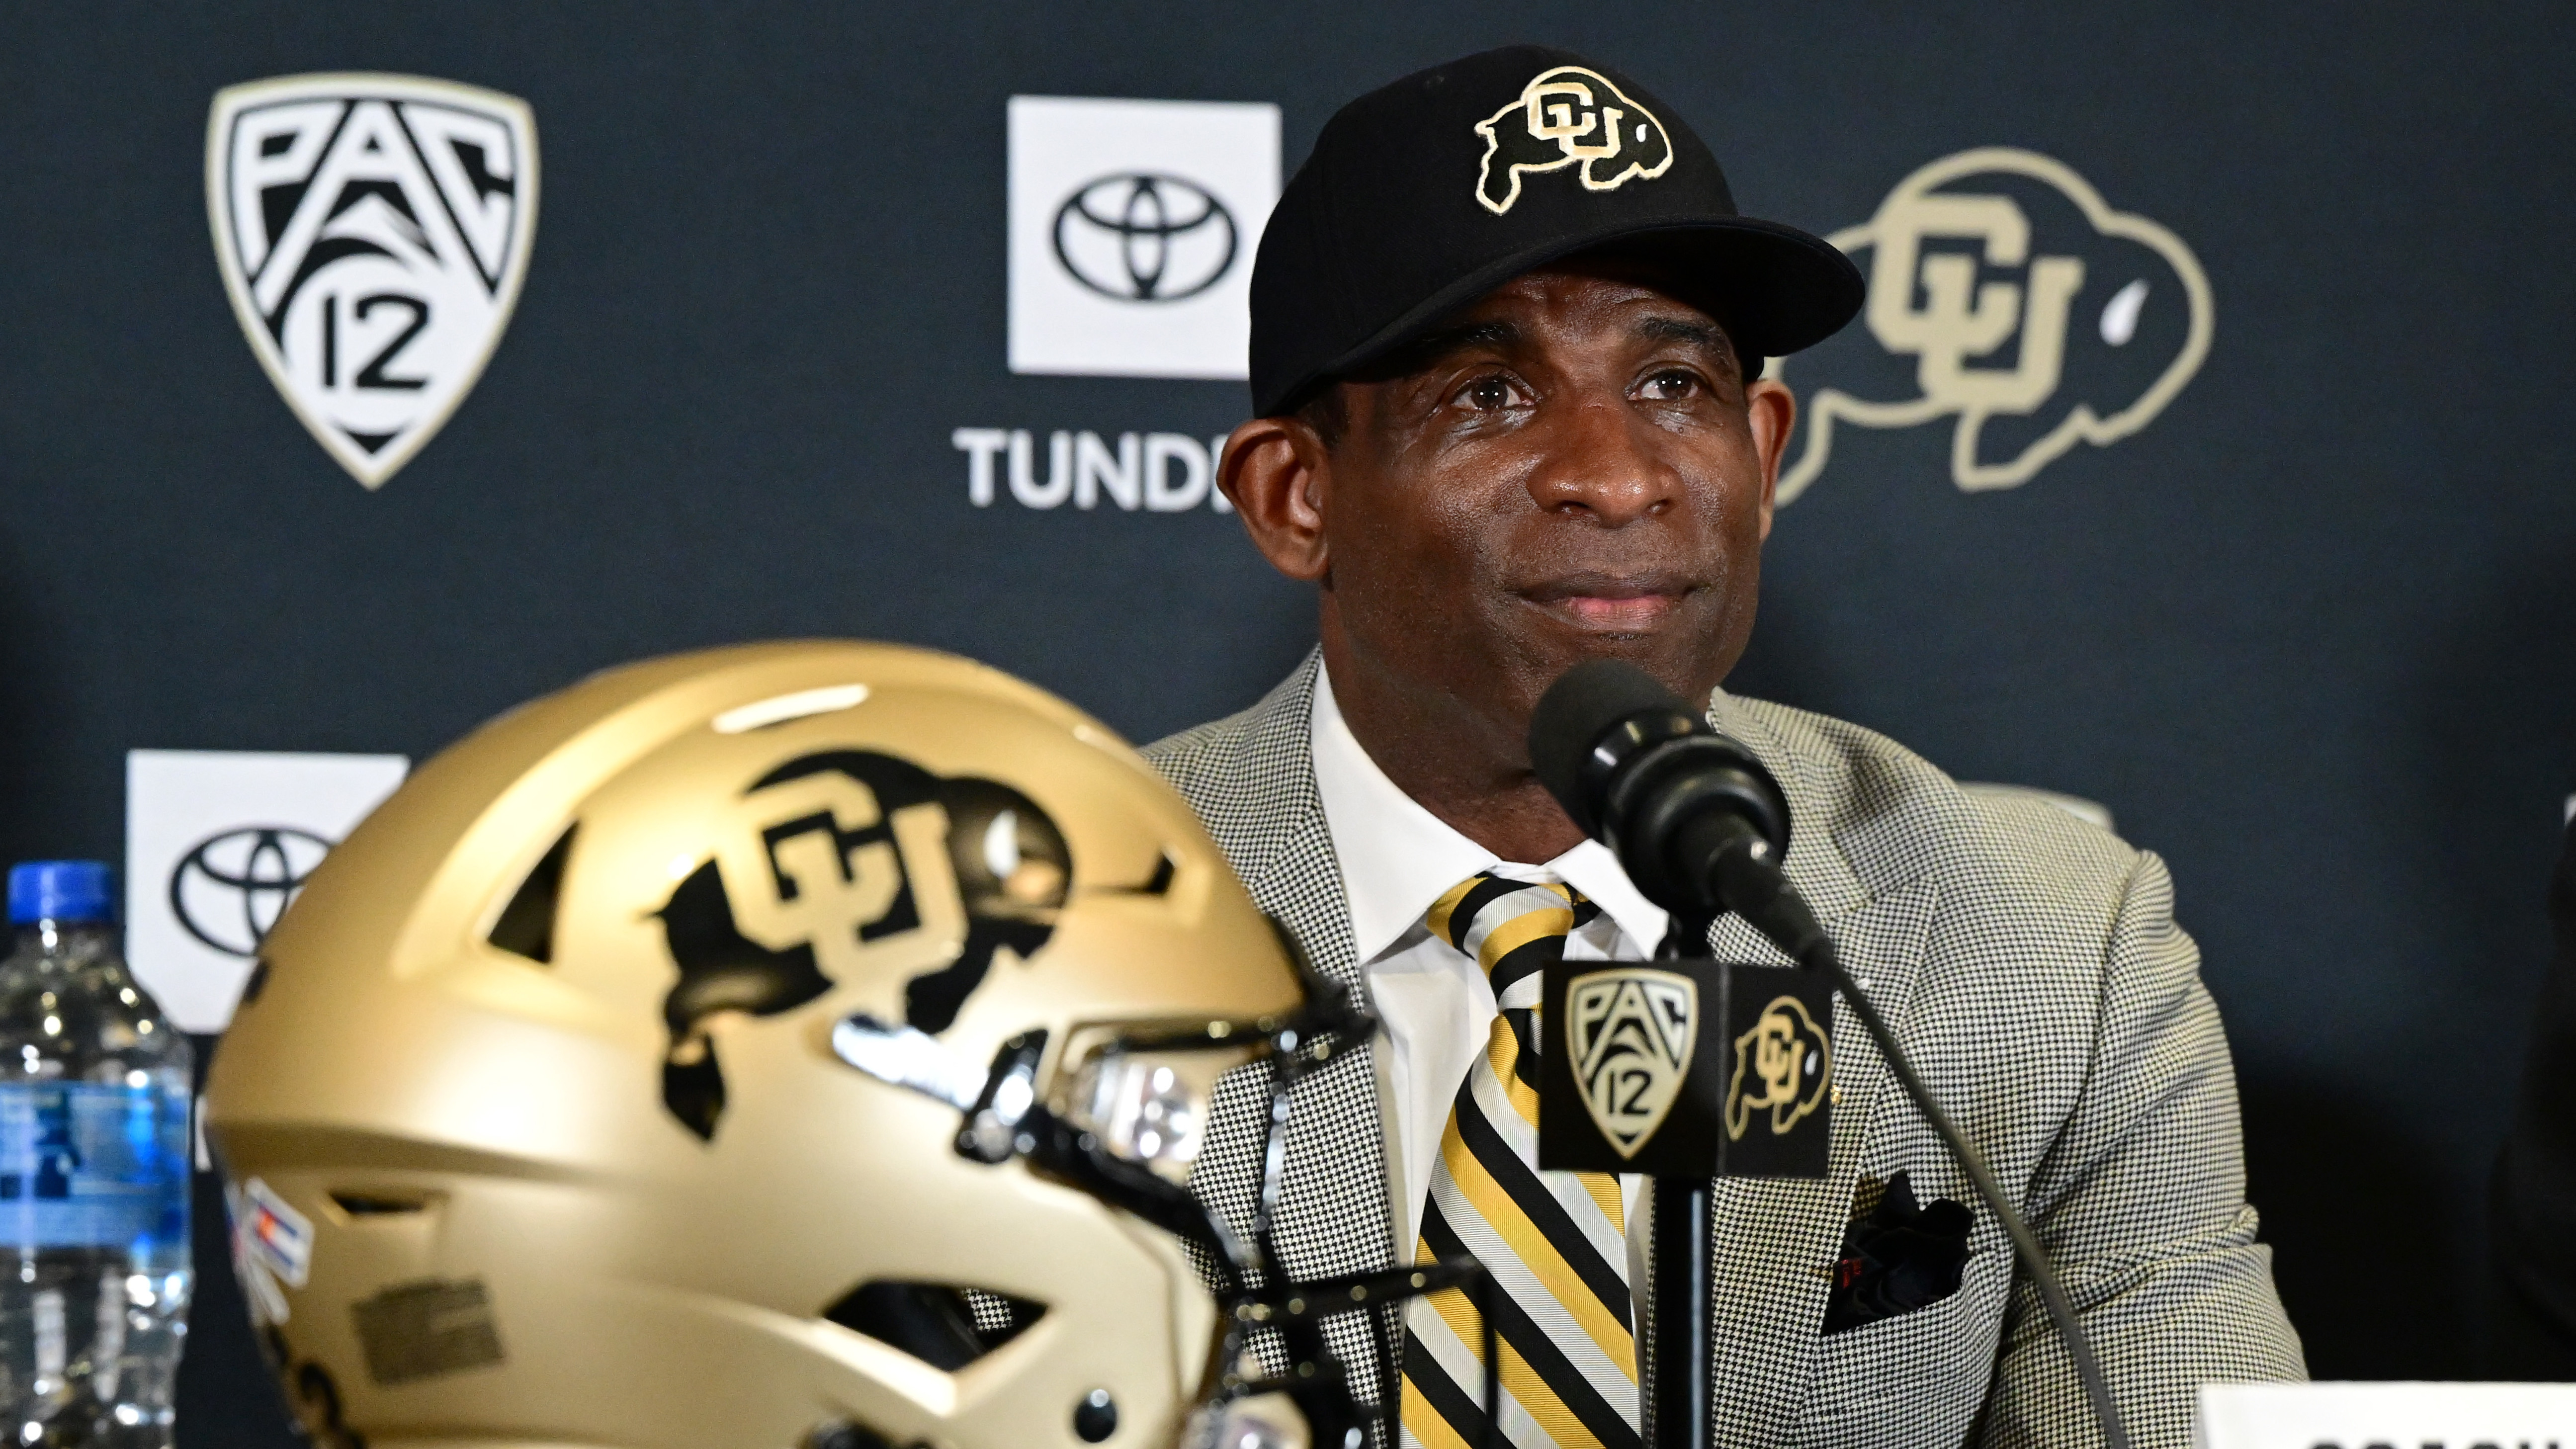 Deion Sanders Named SWAC Coach of the Year After Leading Jackson